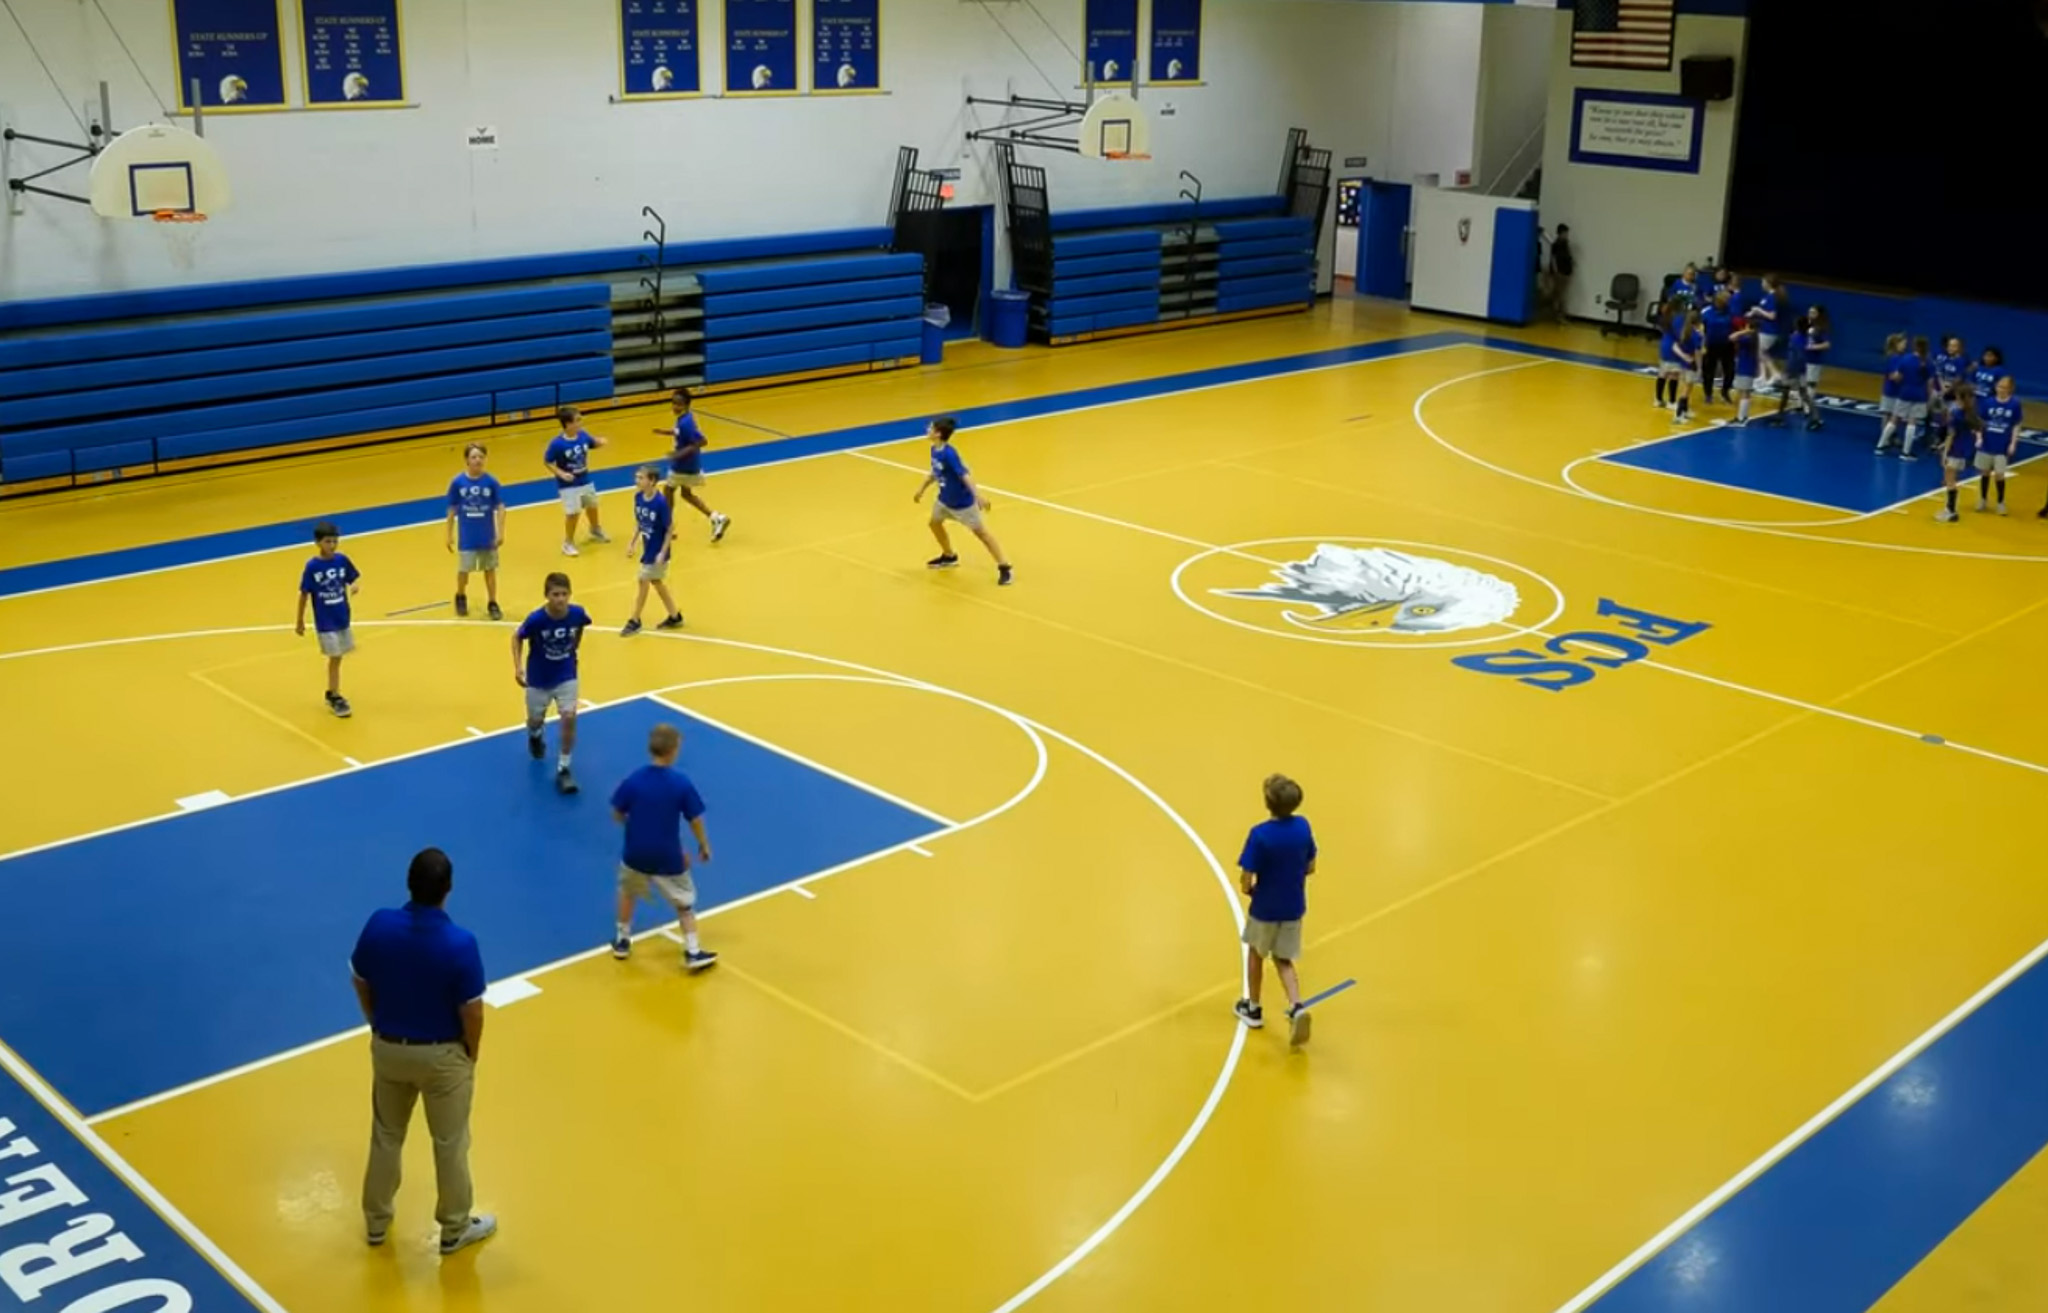 Florence Christian School basketball players on a indoor court